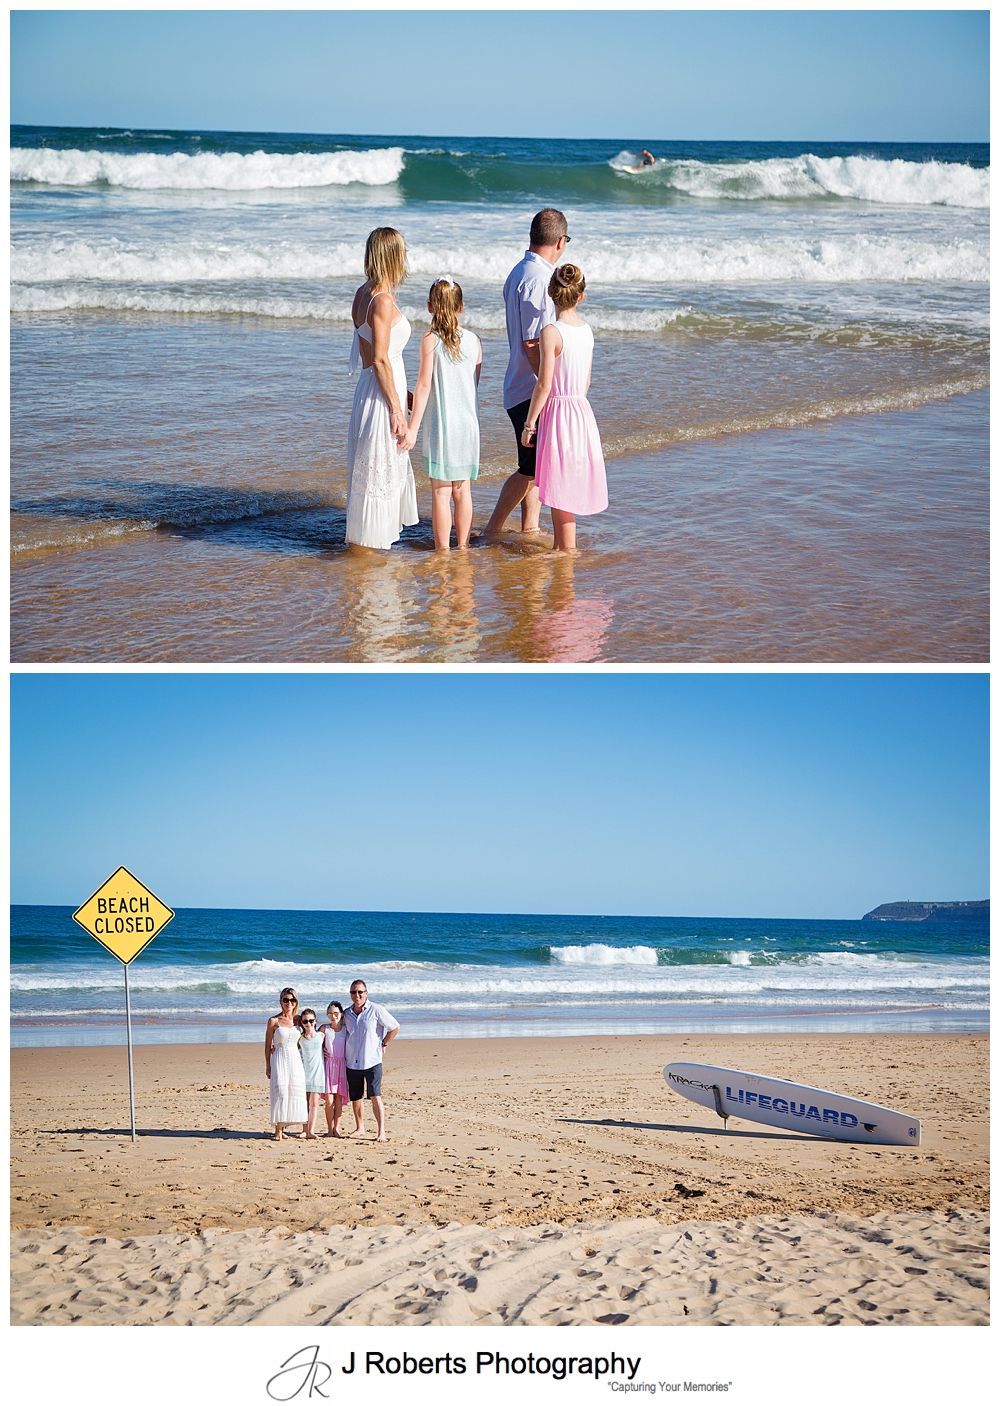 Sydney Family Portrait Photographer Fun Summer Afternoon Session at Long Reef Beach